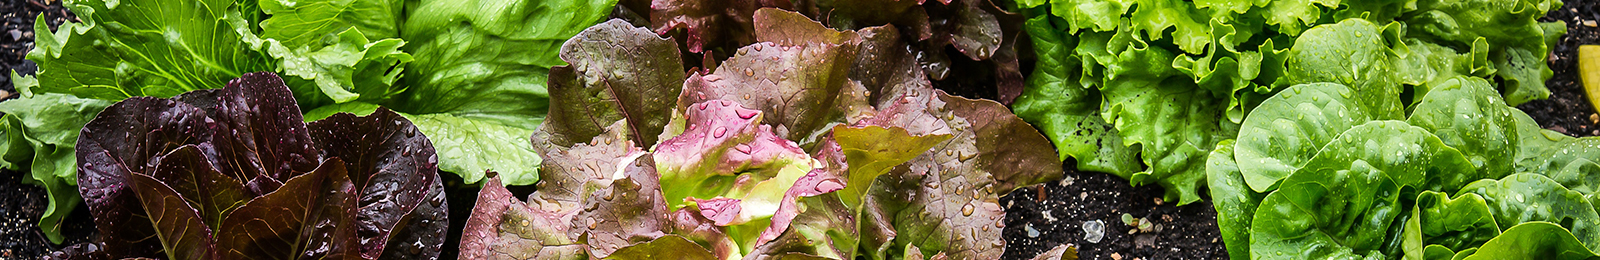 Lettuce: Sow and Grow Guide